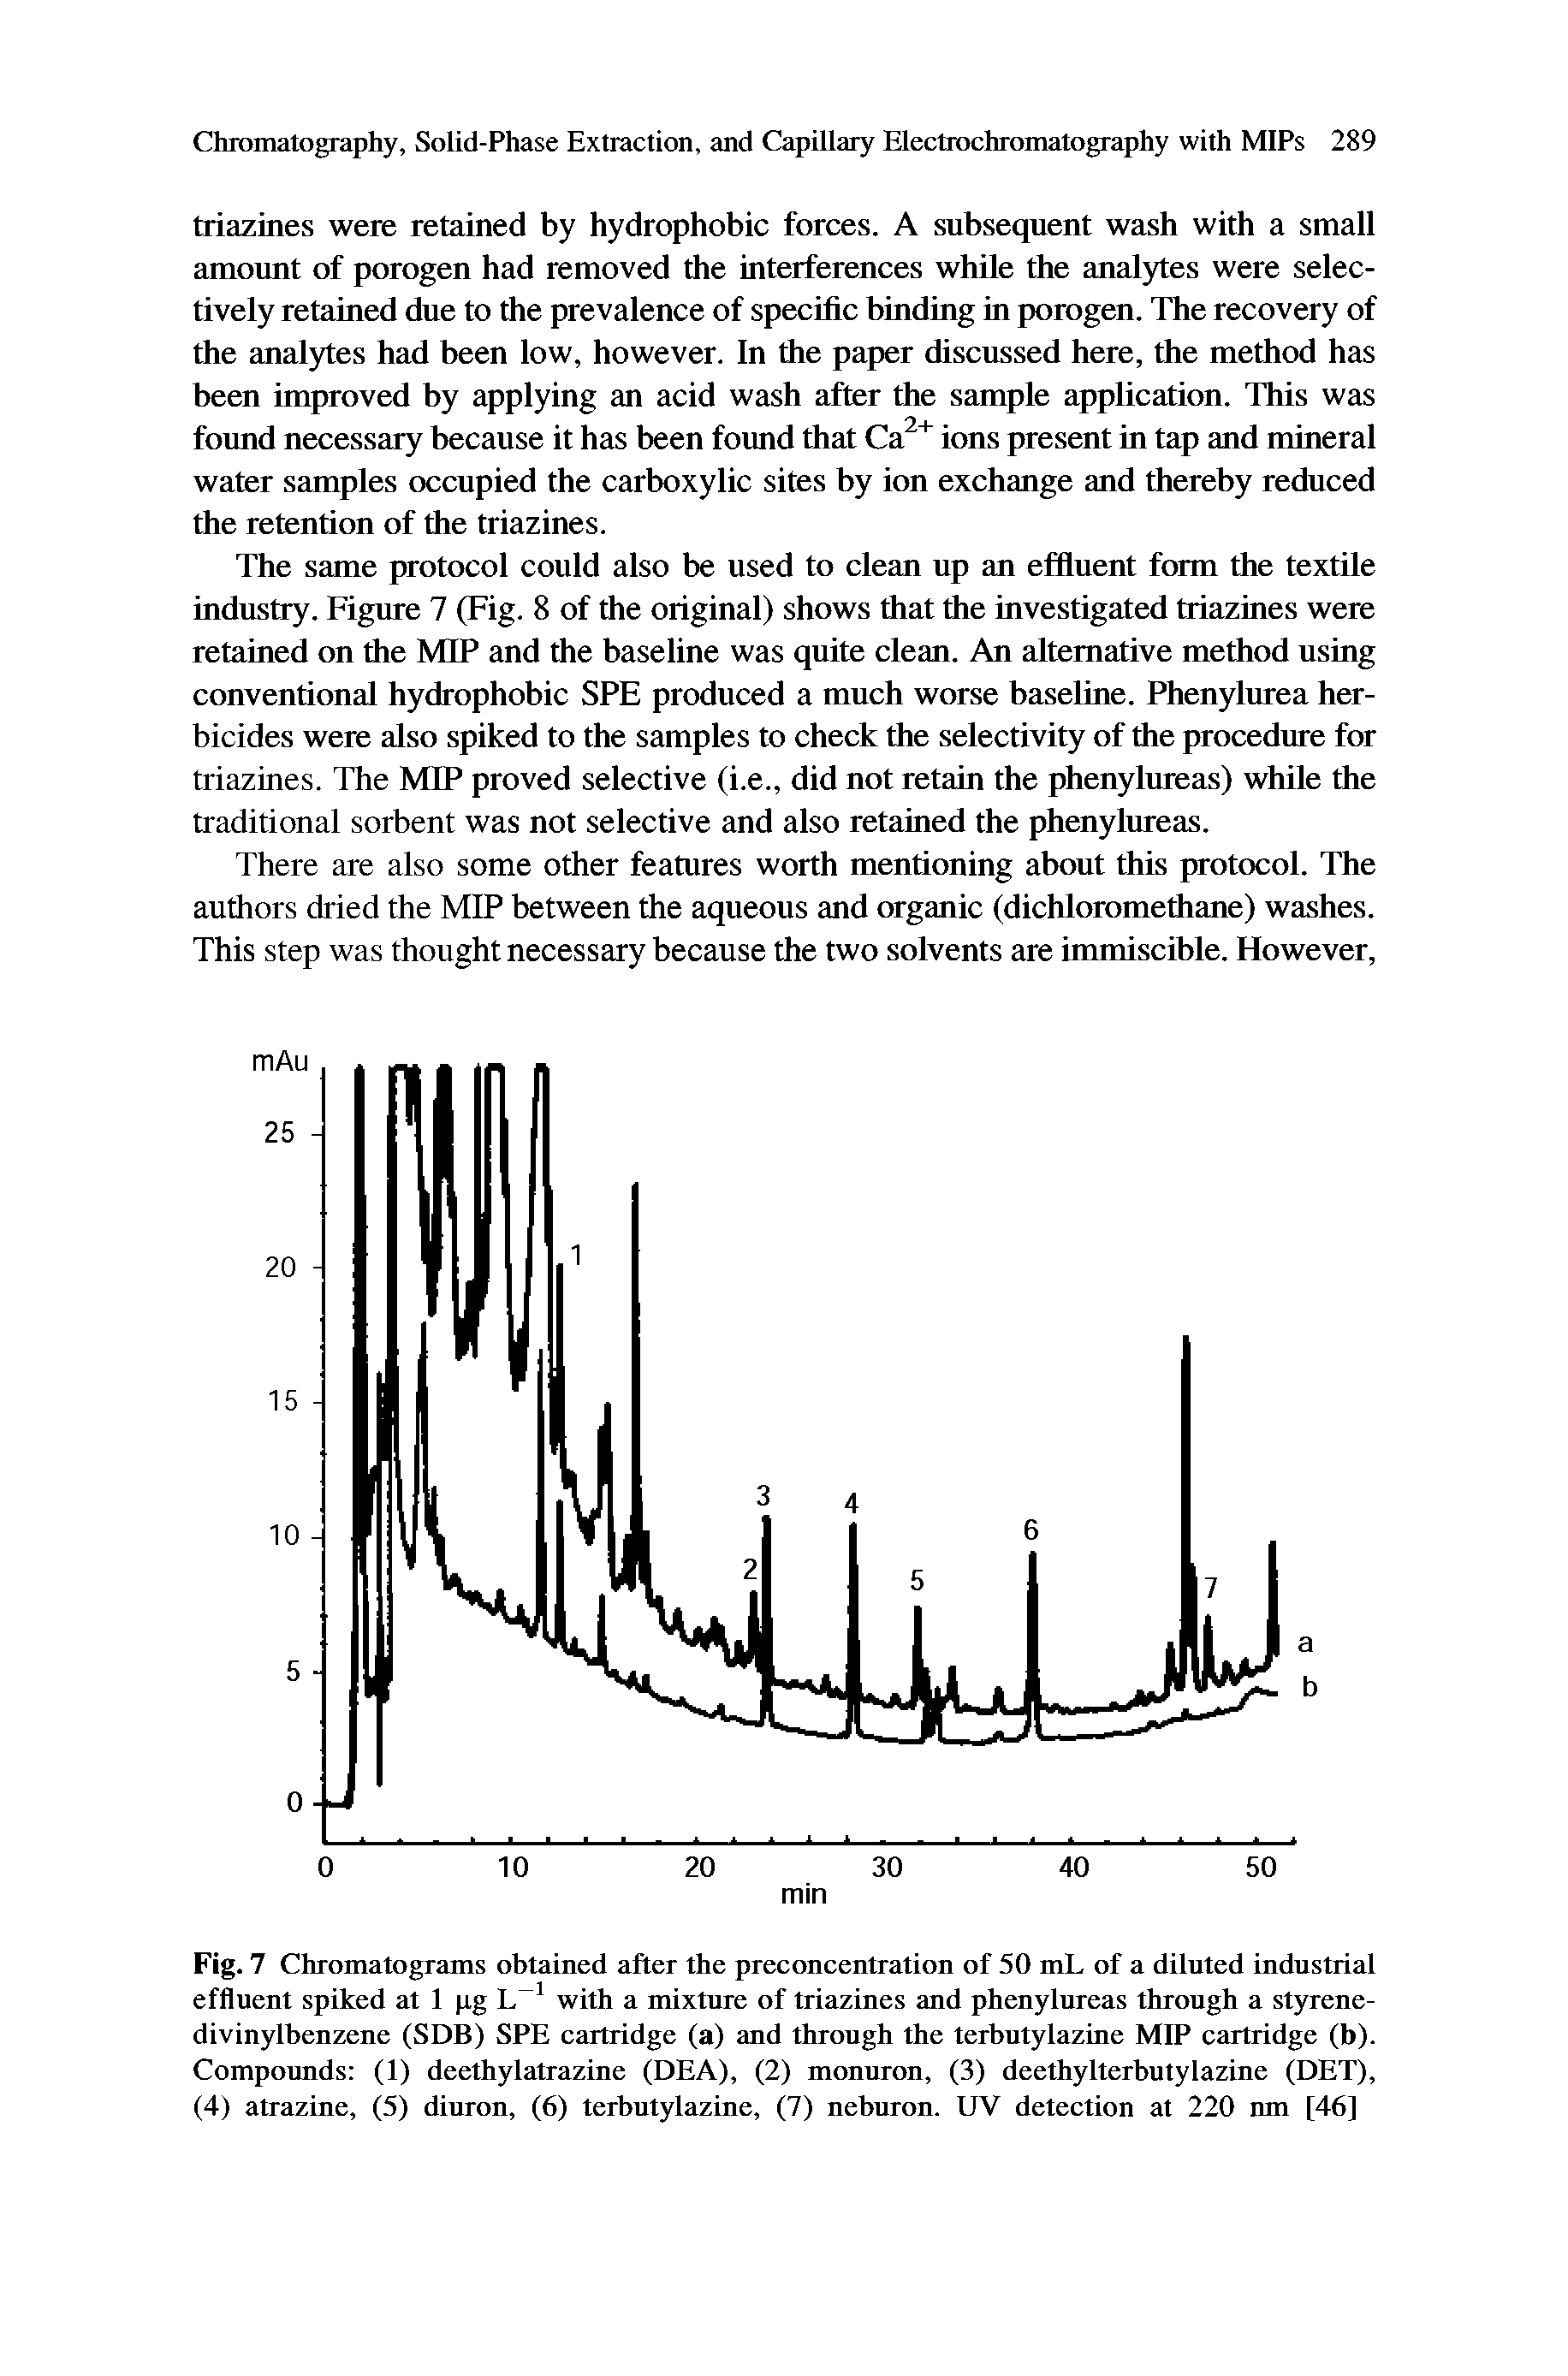 Fig. 7 Chromatograms obtained after the preconcentration of 50 ml of a diluted industrial effluent spiked at 1 pg L 1 with a mixture of triazines and phenylureas through a styrene-divinylbenzene (SDB) SPE cartridge (a) and through the terbutylazine MIP cartridge (b). Compounds (1) deethylatrazine (DEA), (2) monuron, (3) deethylterbutylazine (DET), (4) atrazine, (5) diuron, (6) terbutylazine, (7) neburon. UV detection at 220 nm [46]...